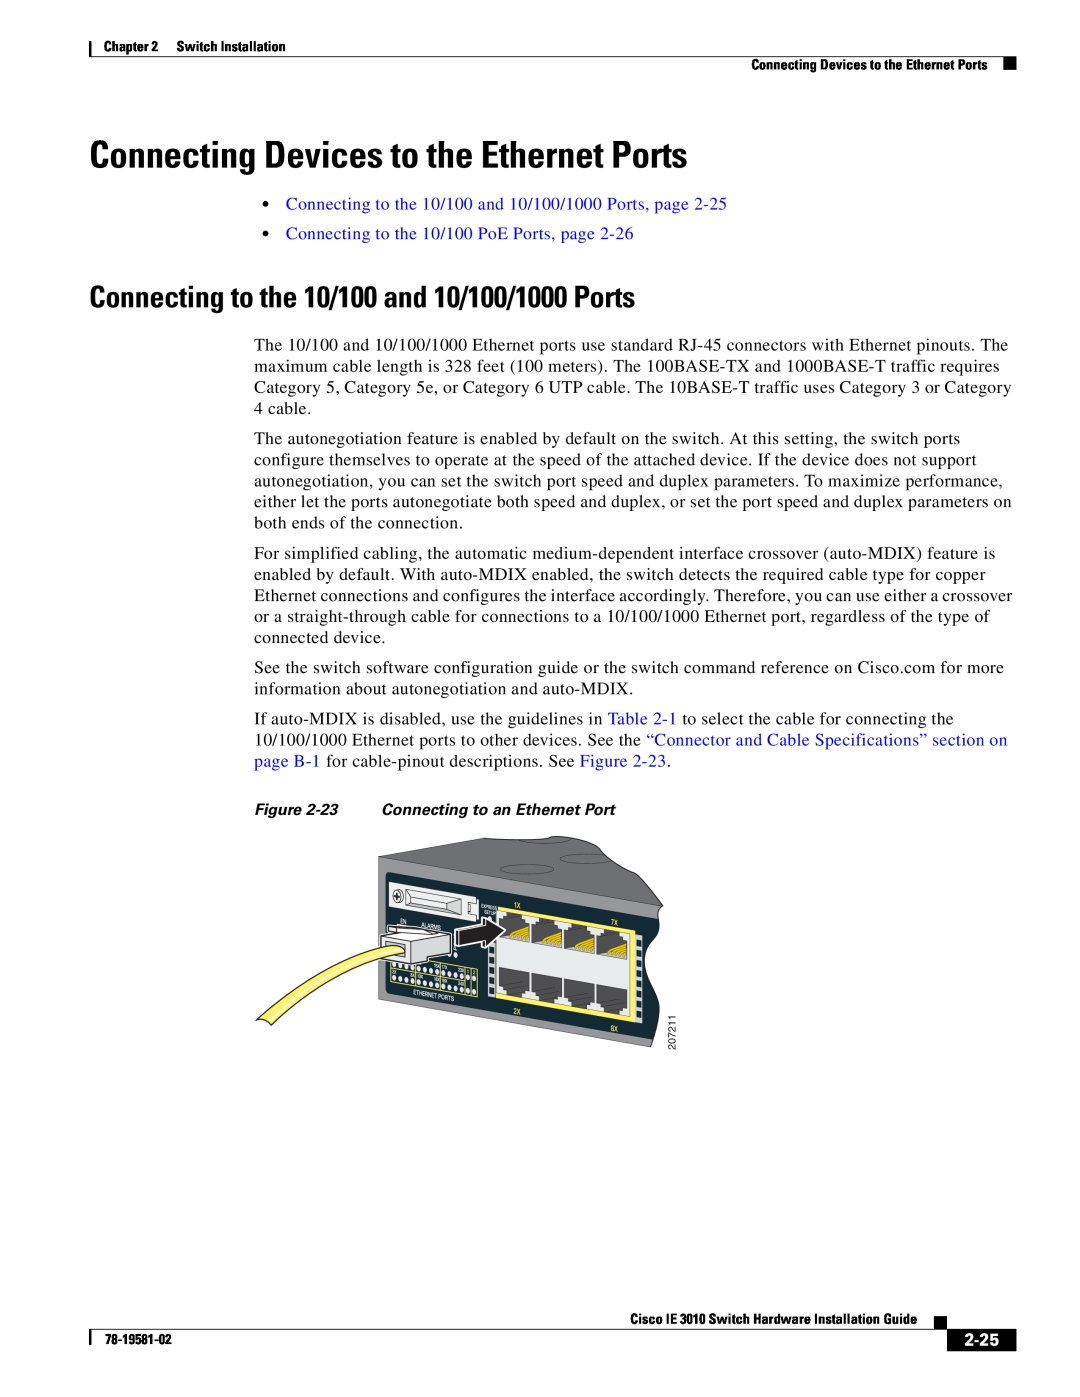 Cisco Systems IE3010 Connecting Devices to the Ethernet Ports, Connecting to the 10/100 and 10/100/1000 Ports, 2-25 